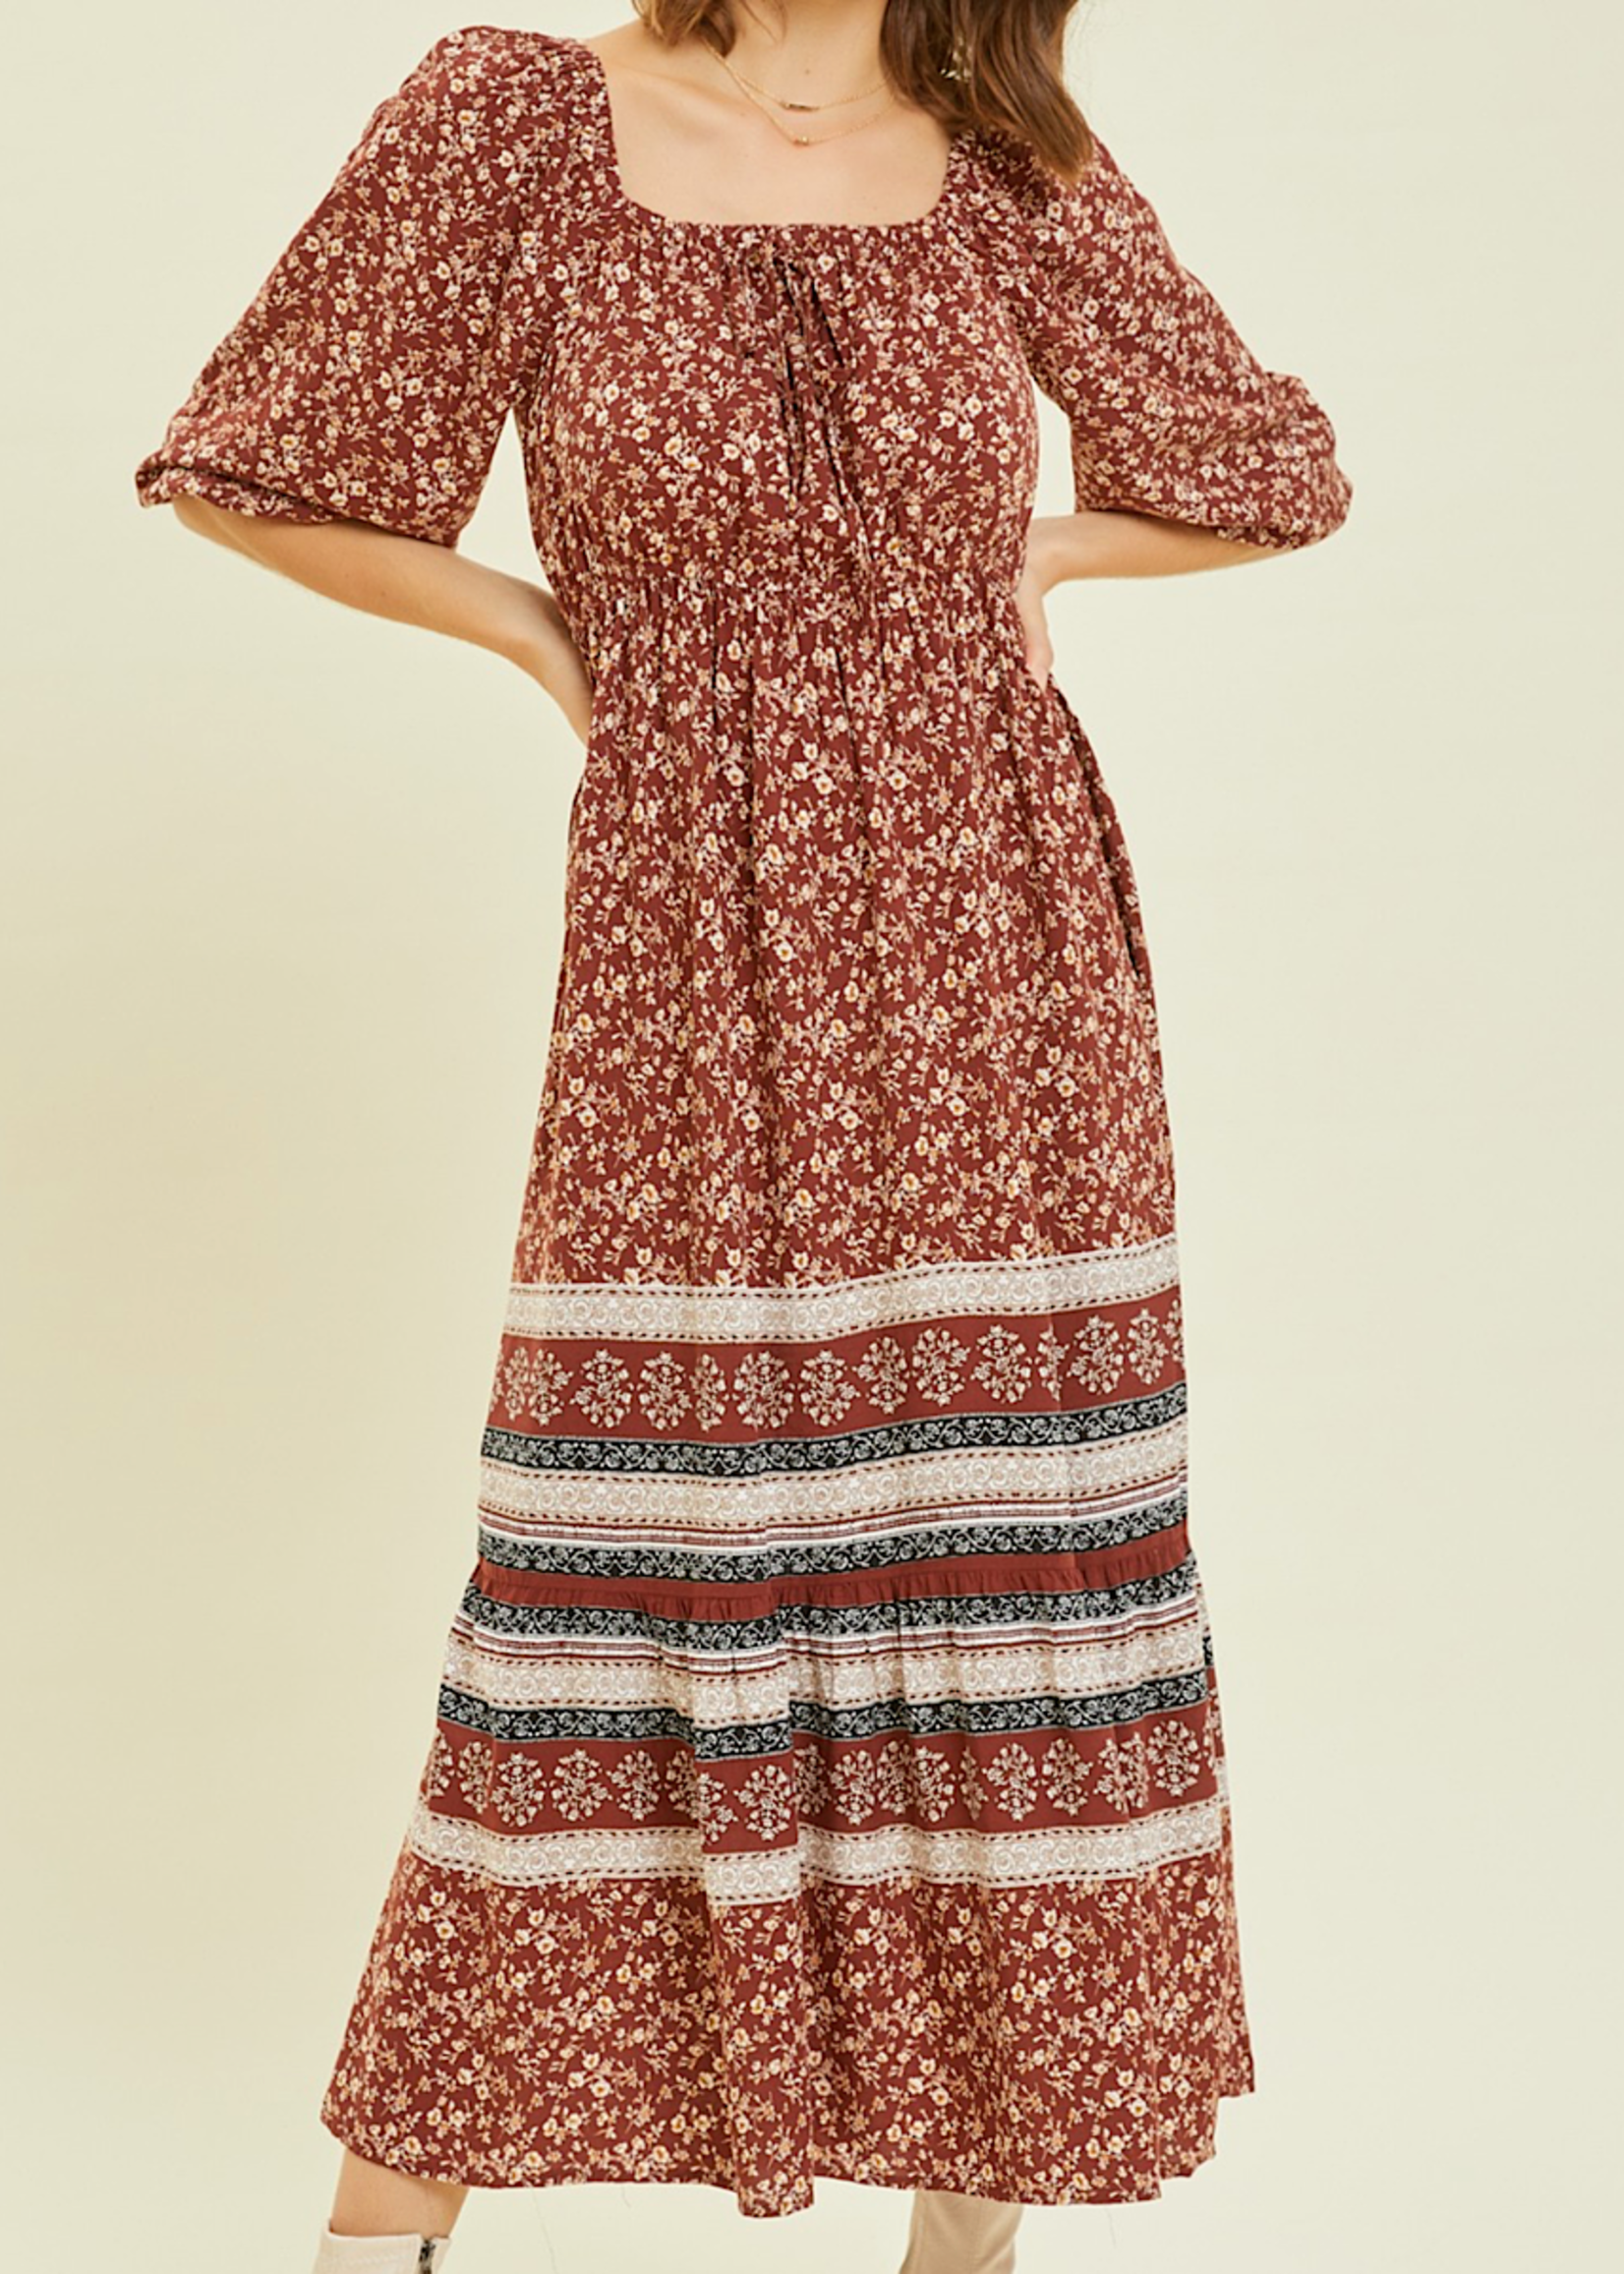 Burgundy Square Neck Floral Printed Midi Dress with 3/4 Sleeves